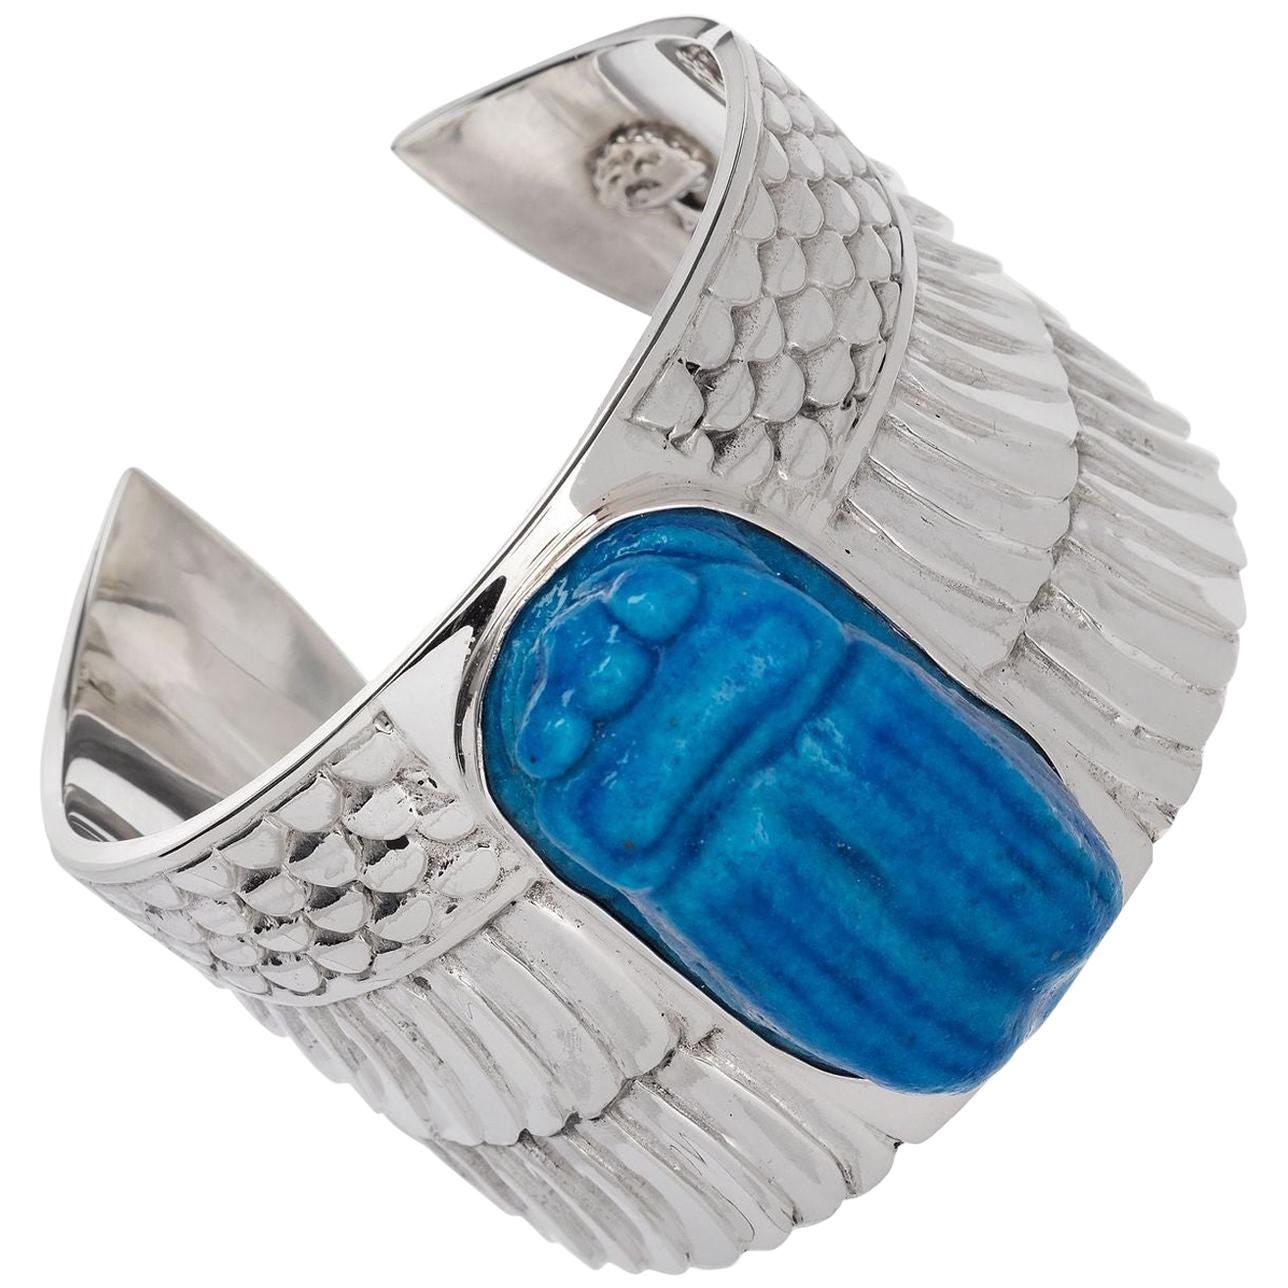 Turquoise Egyptian Scarab Faience Cuff in Sterling Silver Bracelet